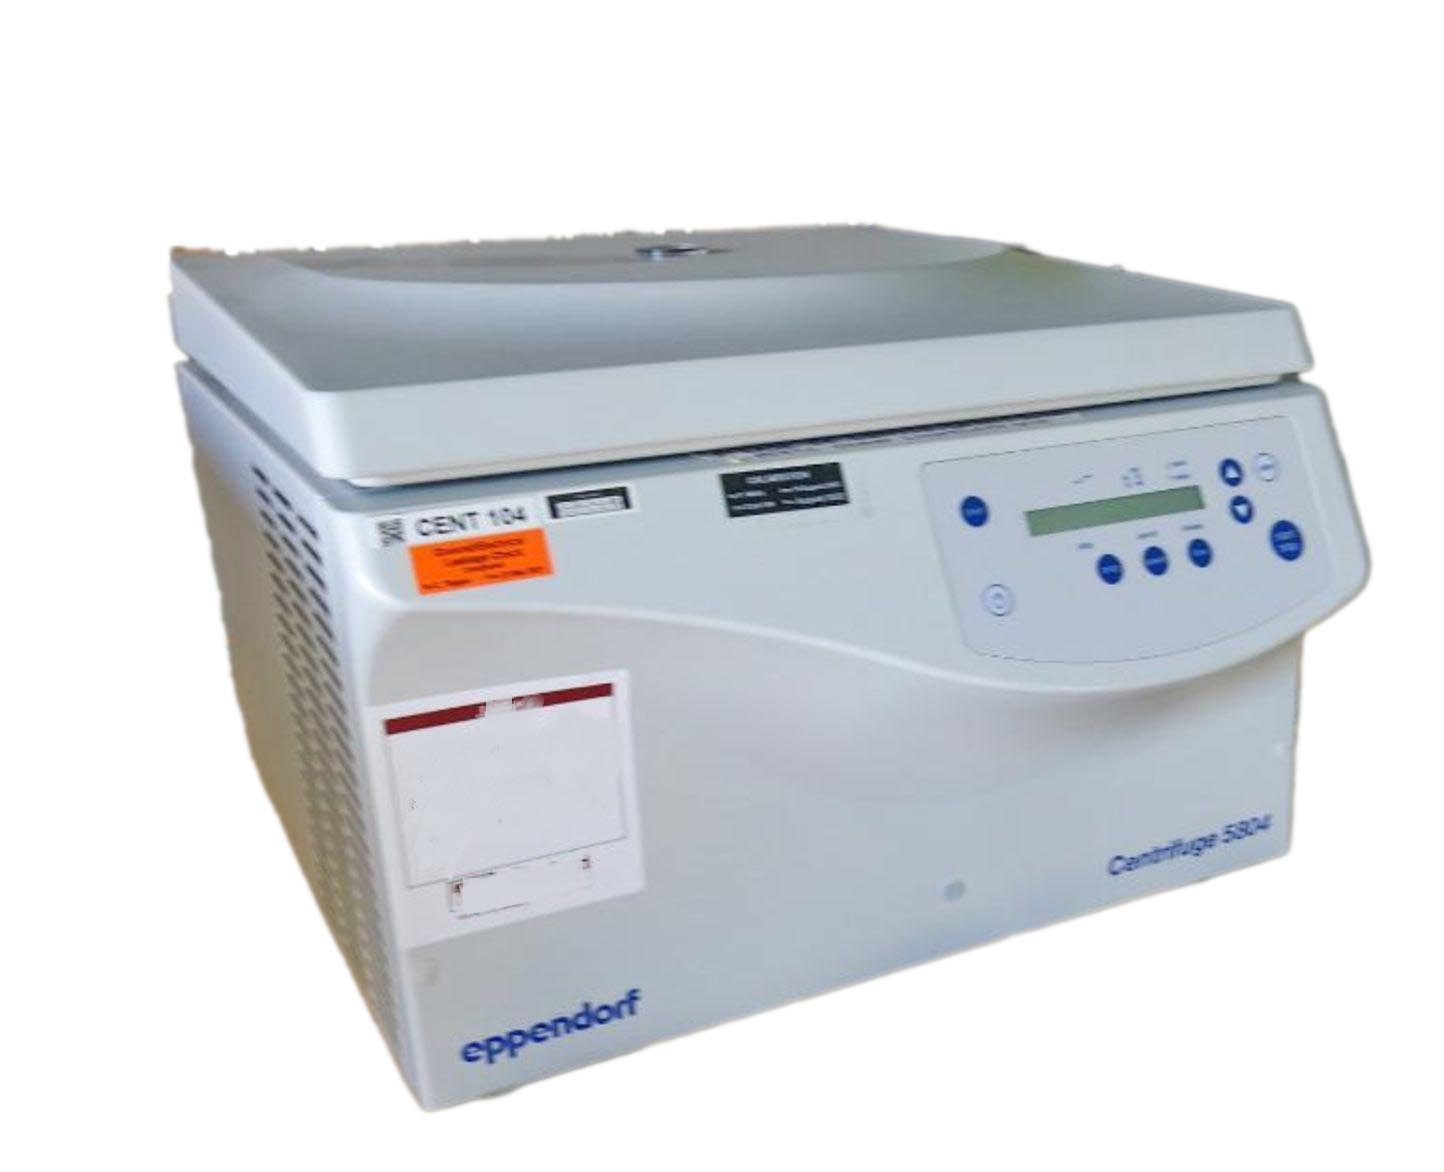 Eppendorf 5804 Benchtop Centrifuge with A-2-DWP Microplate Rotor